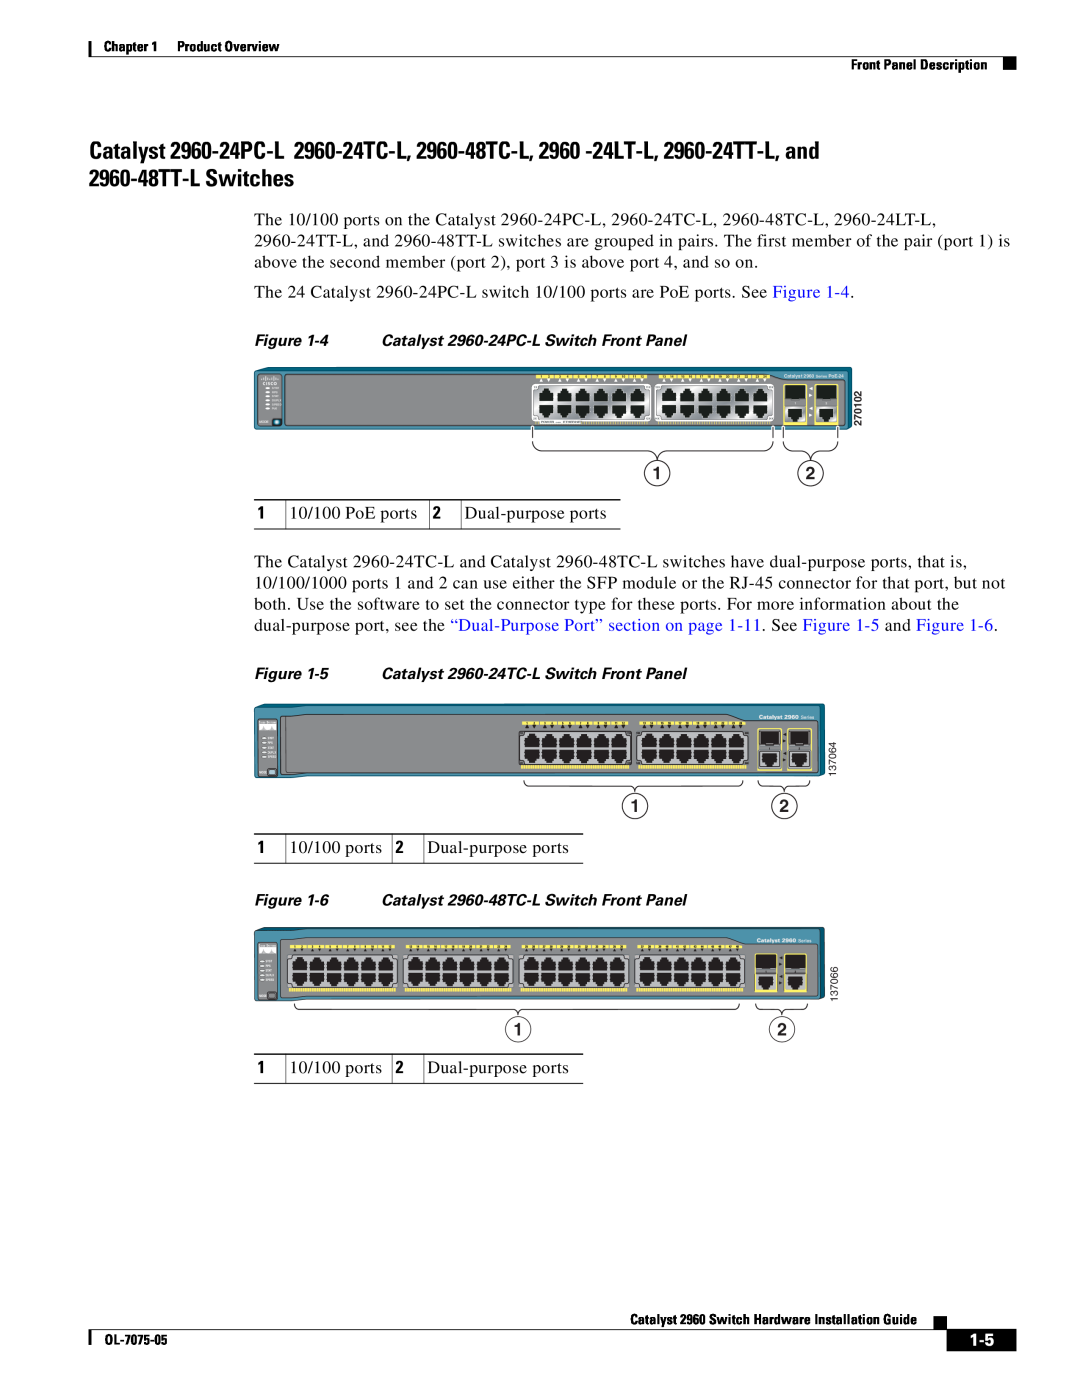 Cisco Systems specifications Catalyst 2960-24PC-L Switch Front Panel, 5 Catalyst 2960-24TC-L Switch Front Panel 